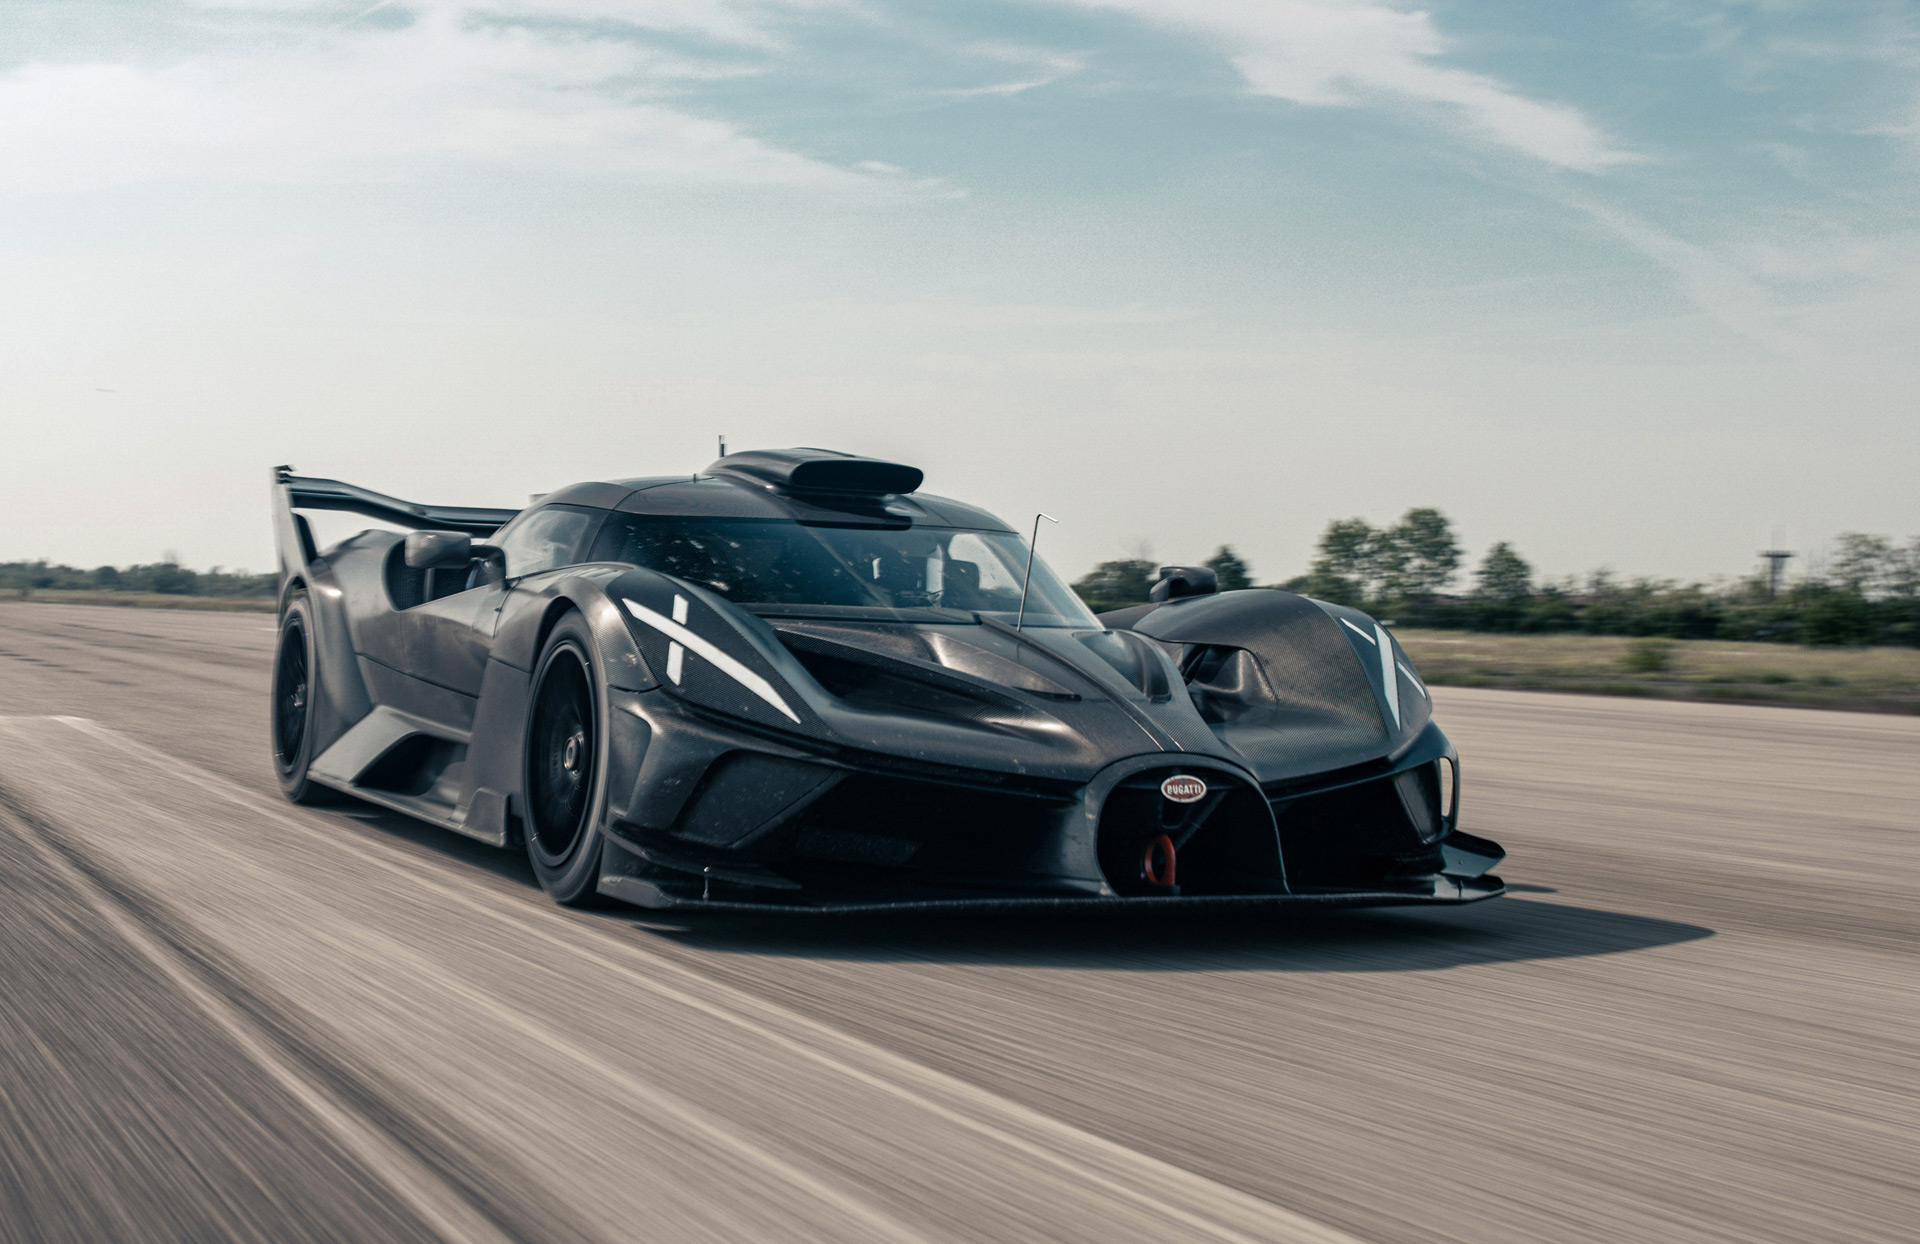 Bugatti Bolide hypercar testing ahead of deliveries in 2024